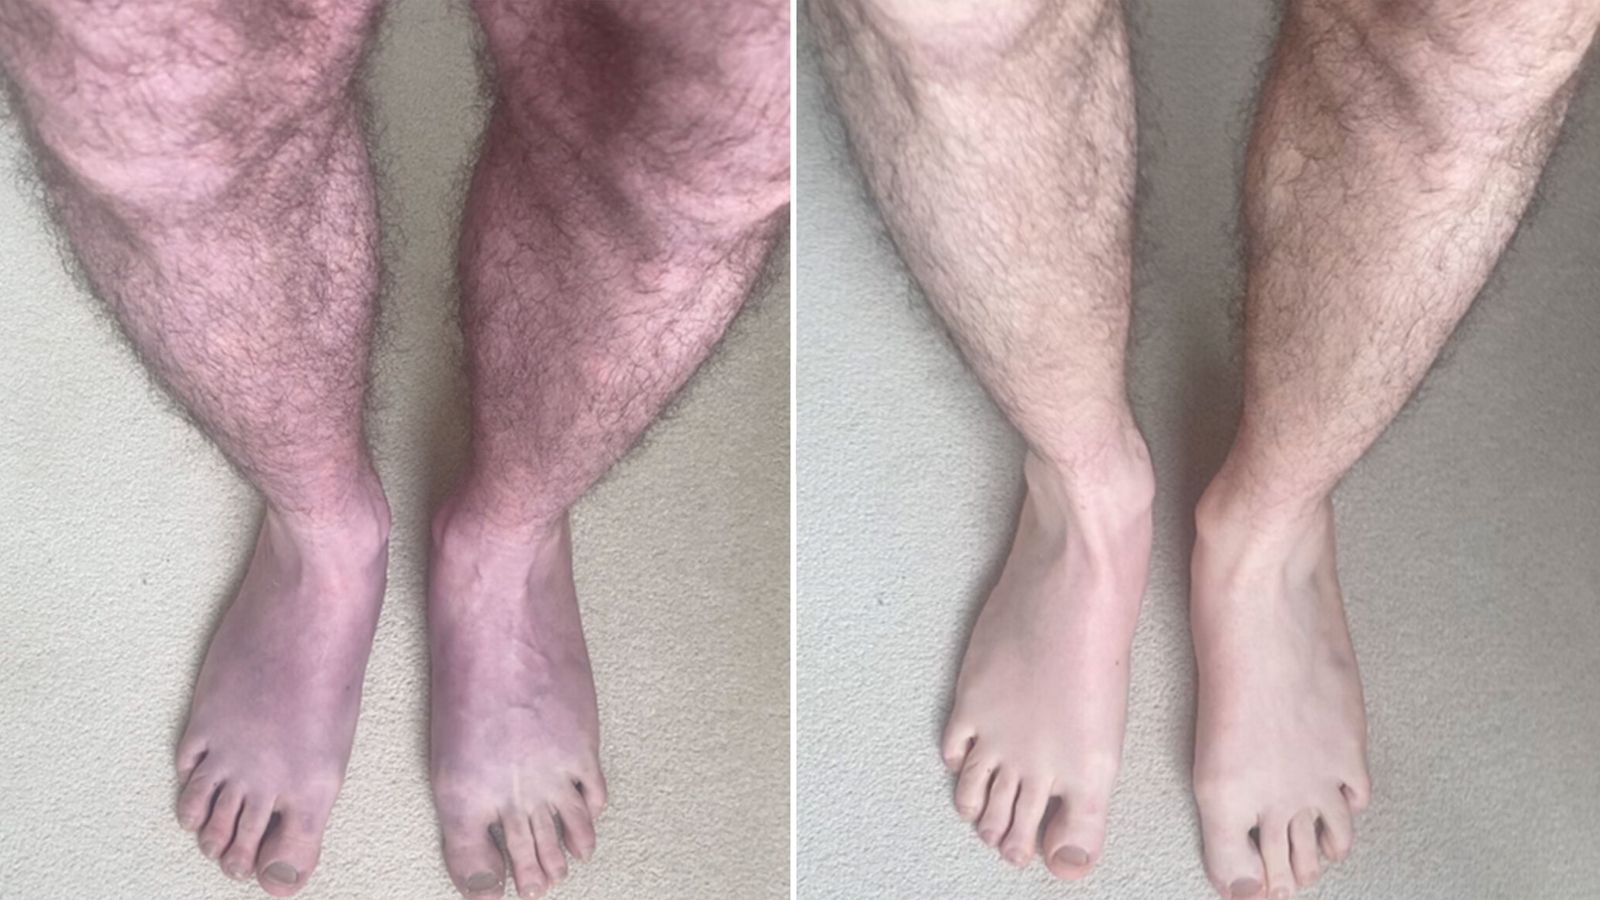 Long COVID: The unusual case that turns man's legs blue